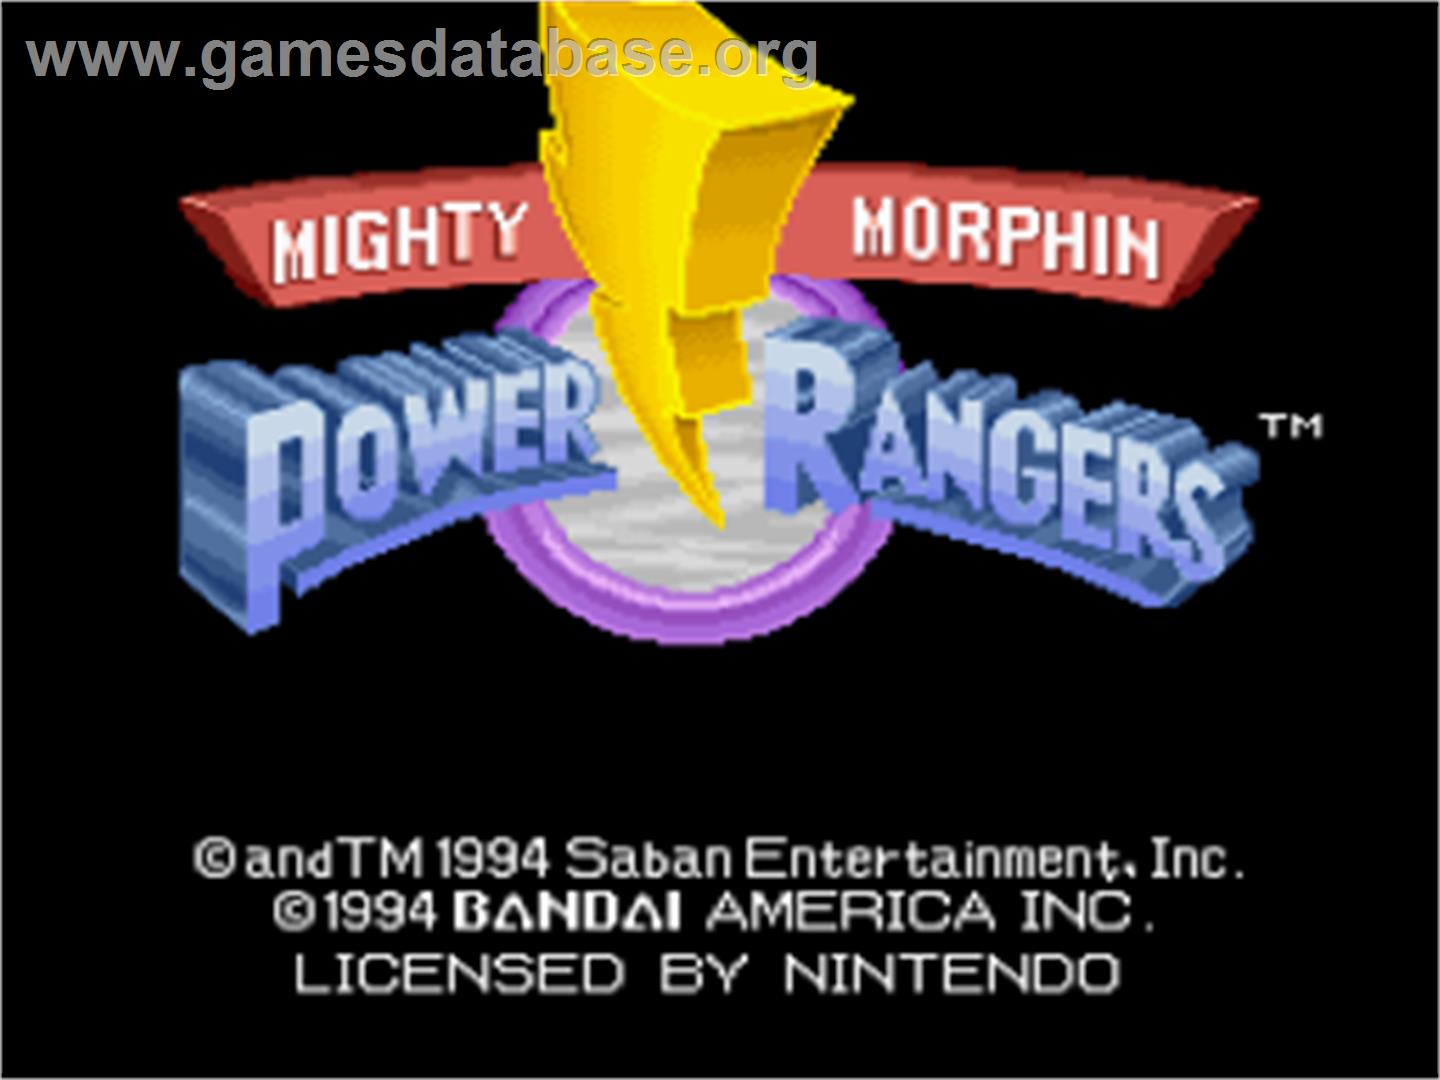 Mighty Morphin Power Rangers: The Fighting Edition - Nintendo SNES - Artwork - Title Screen